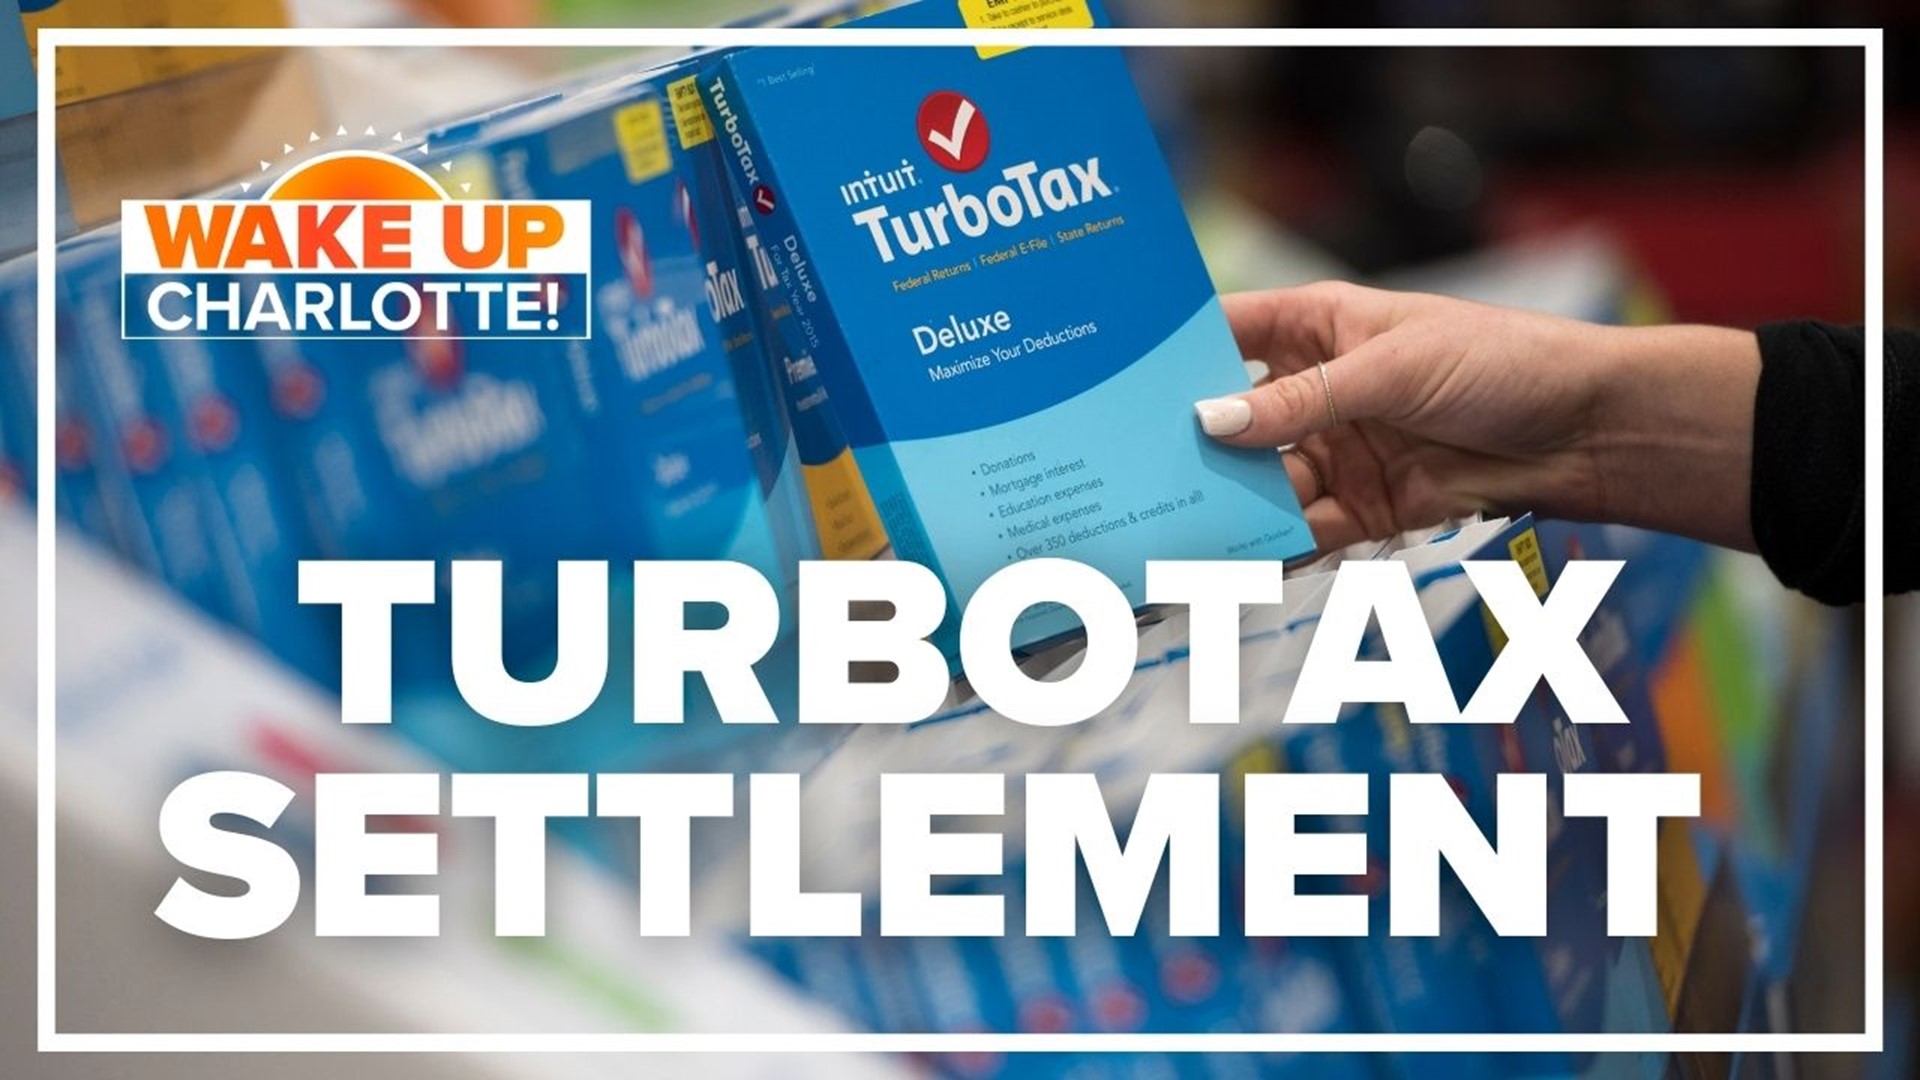 Nearly 140,000 North Carolinians are owed money from Intuit Inc. after its TurboTax product deceived customers into paying for services that were advertised as free.